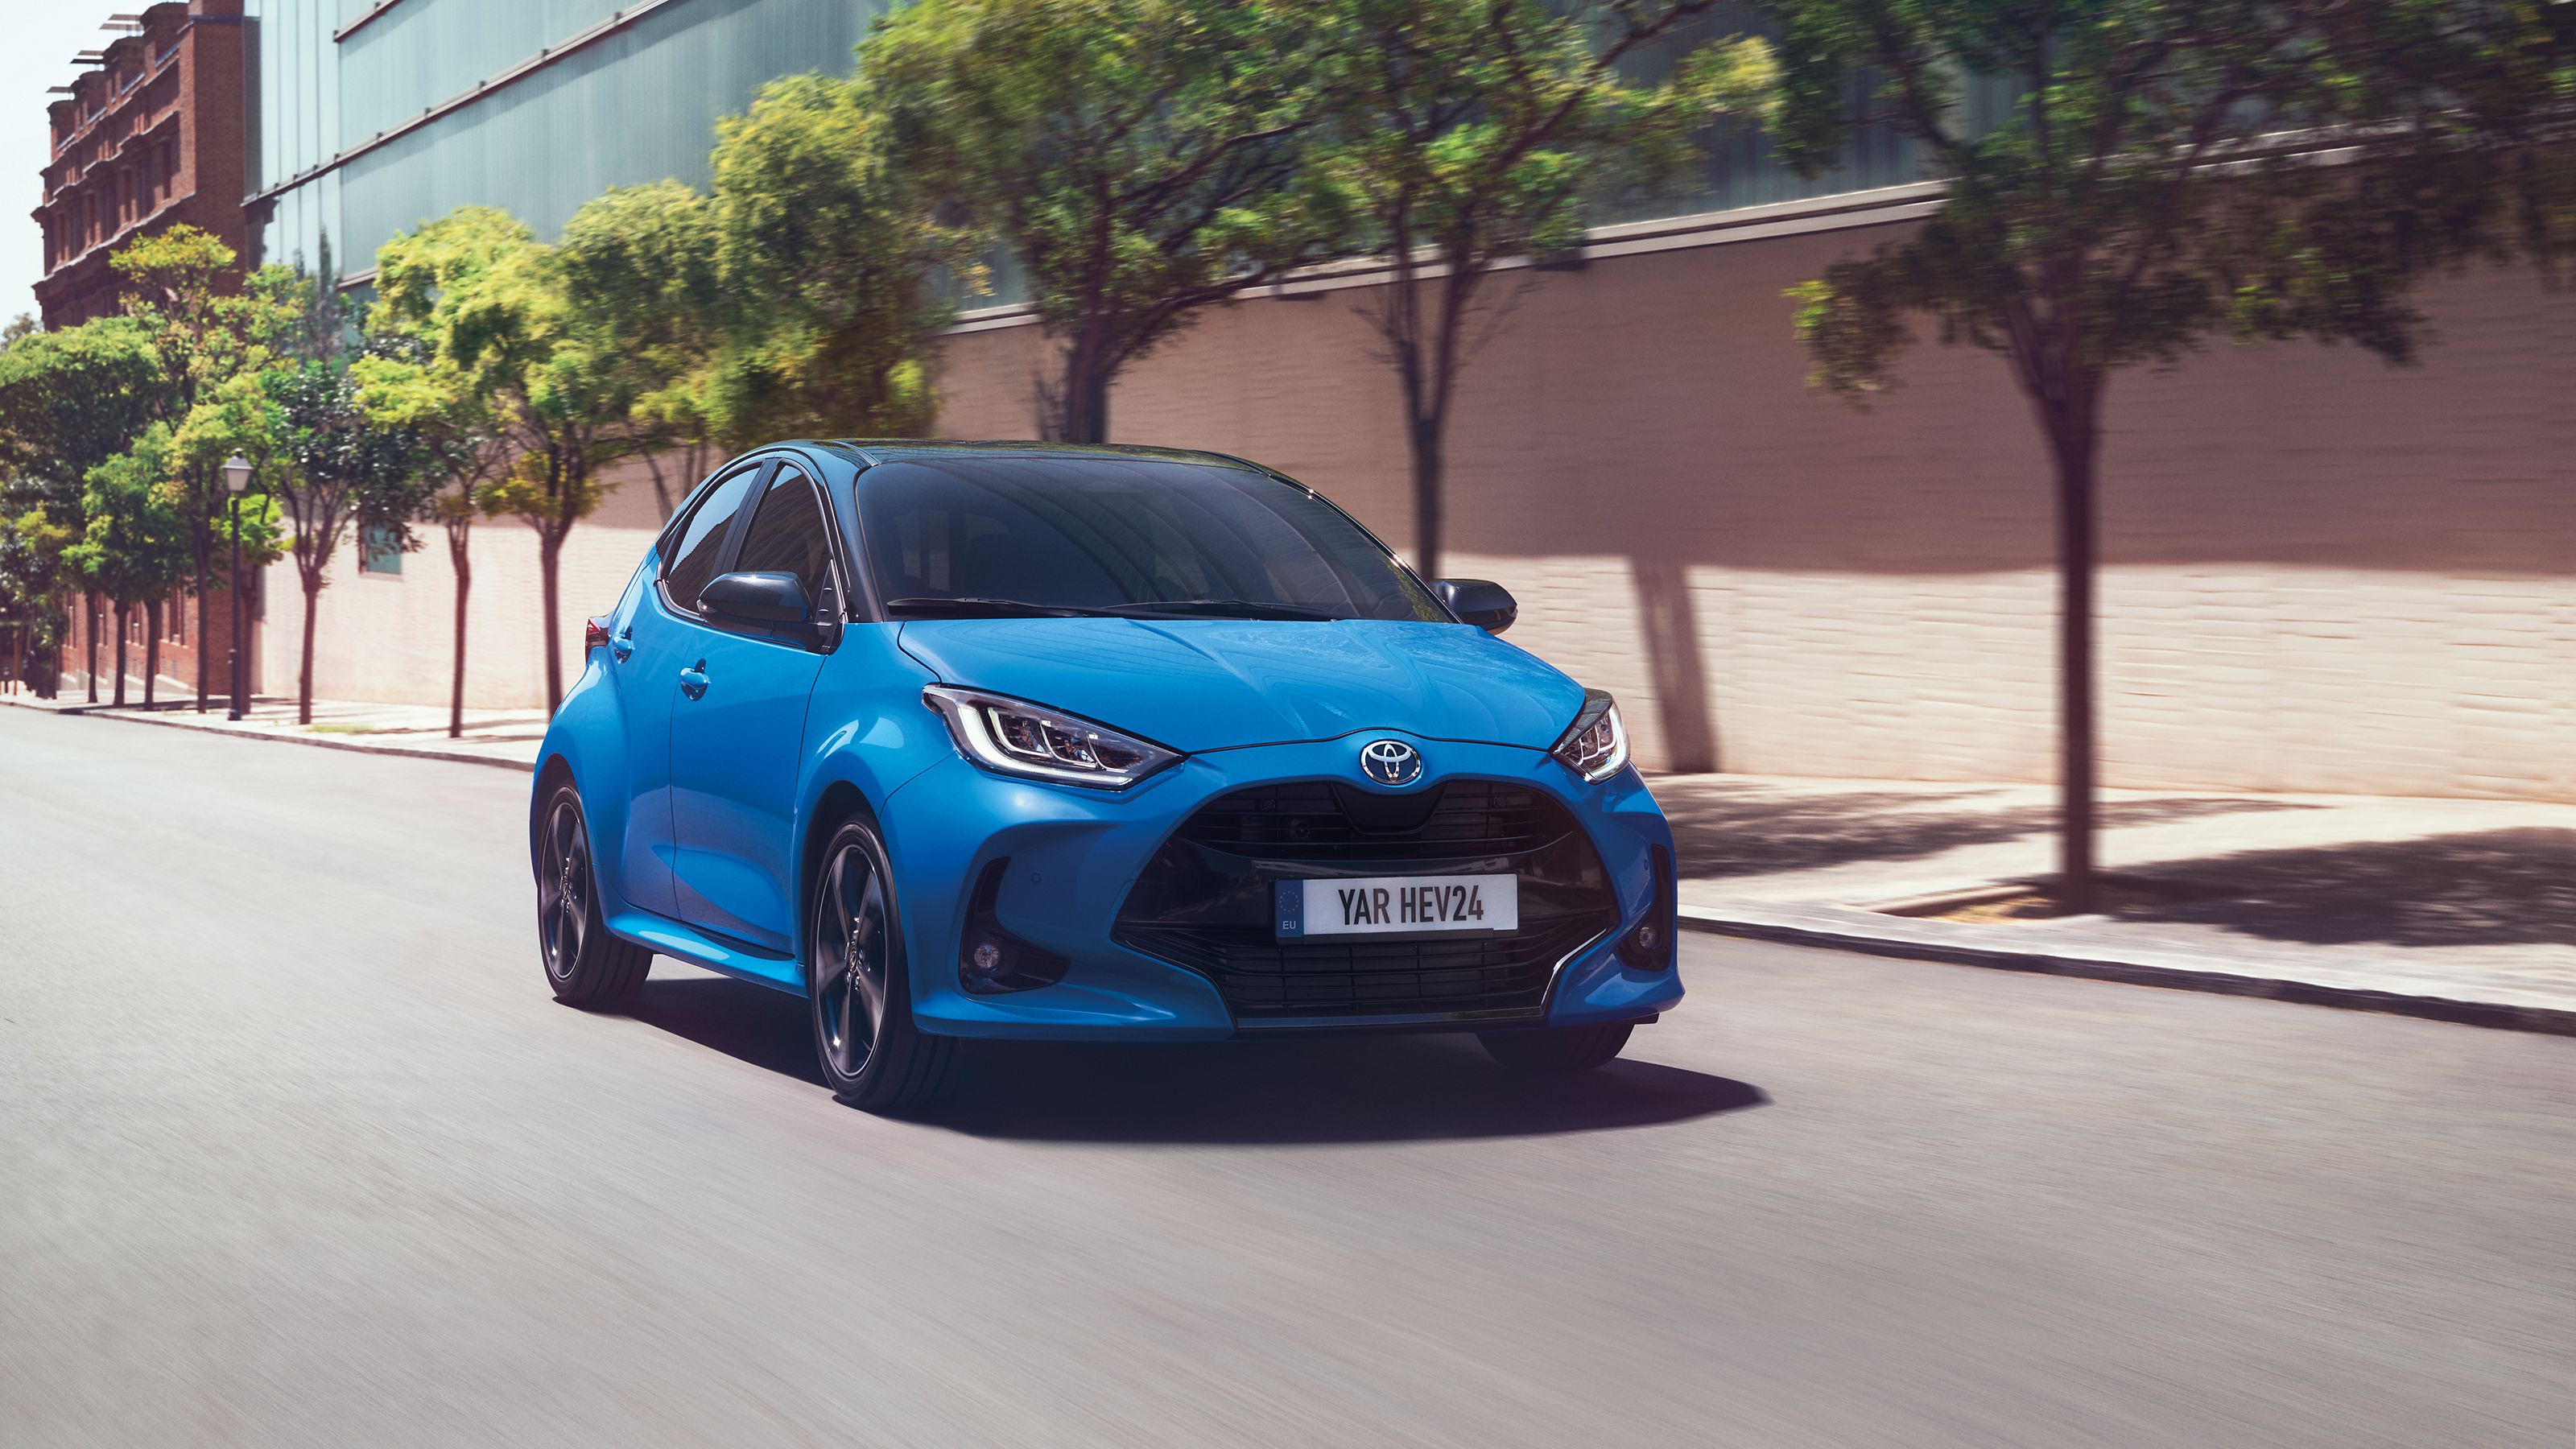 https://scene7.toyota.eu/is/image/toyotaeurope/TOY_YARIS_MC_2024_HUB_CON_IMG_BANK_01_EXTENDED:Large-Landscape?ts=1702689782542&resMode=sharp2&op_usm=1.75,0.3,2,0